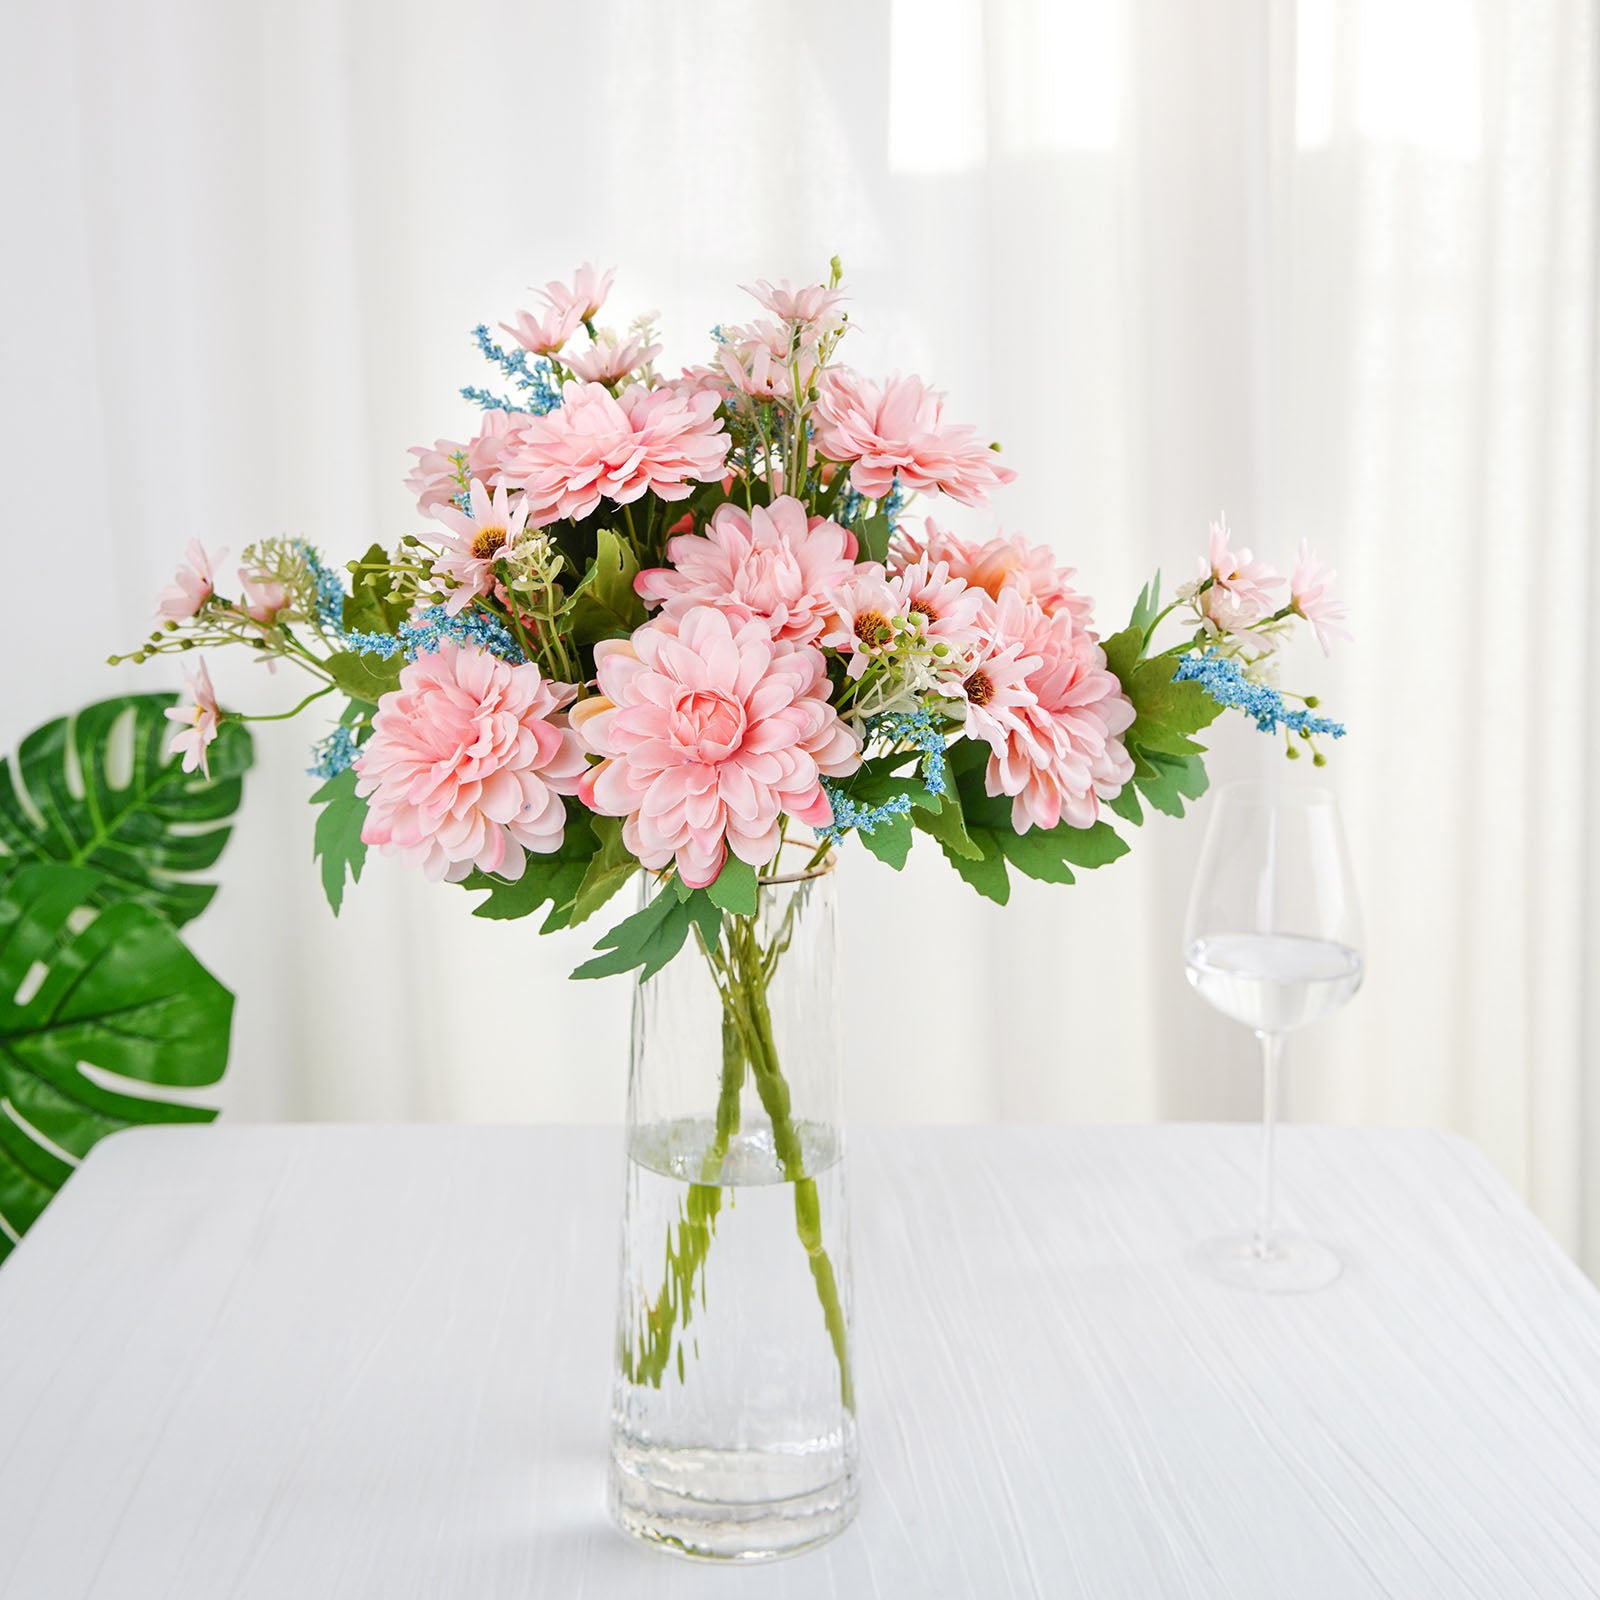  Fake Flowers with Vase, Blue Dahlia Artificial Flowers